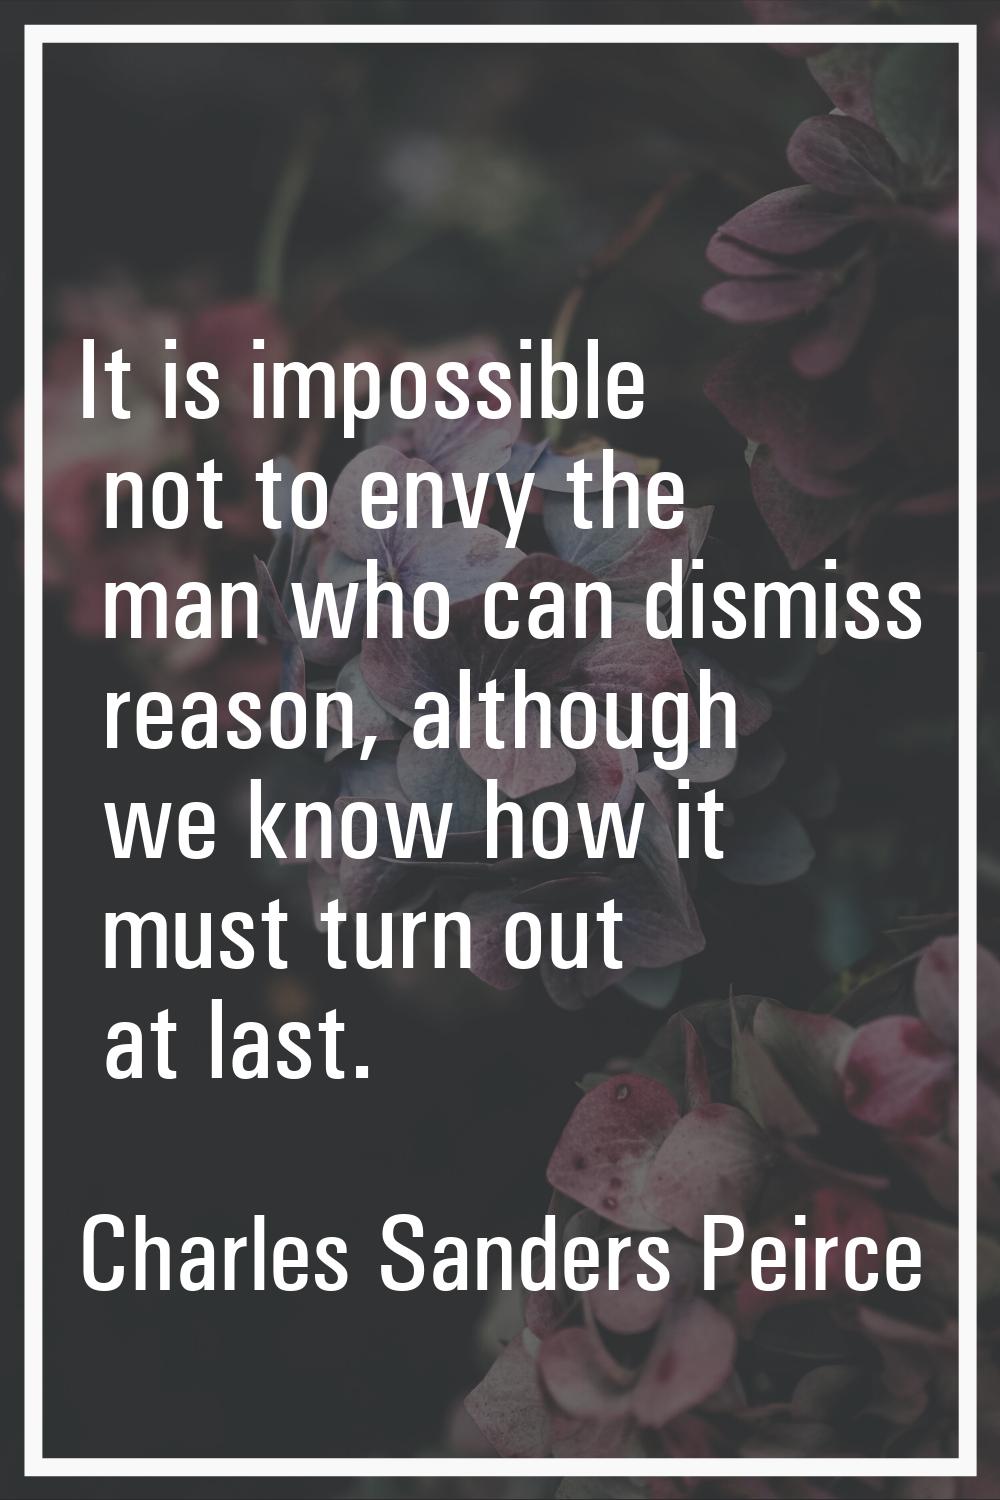 It is impossible not to envy the man who can dismiss reason, although we know how it must turn out 